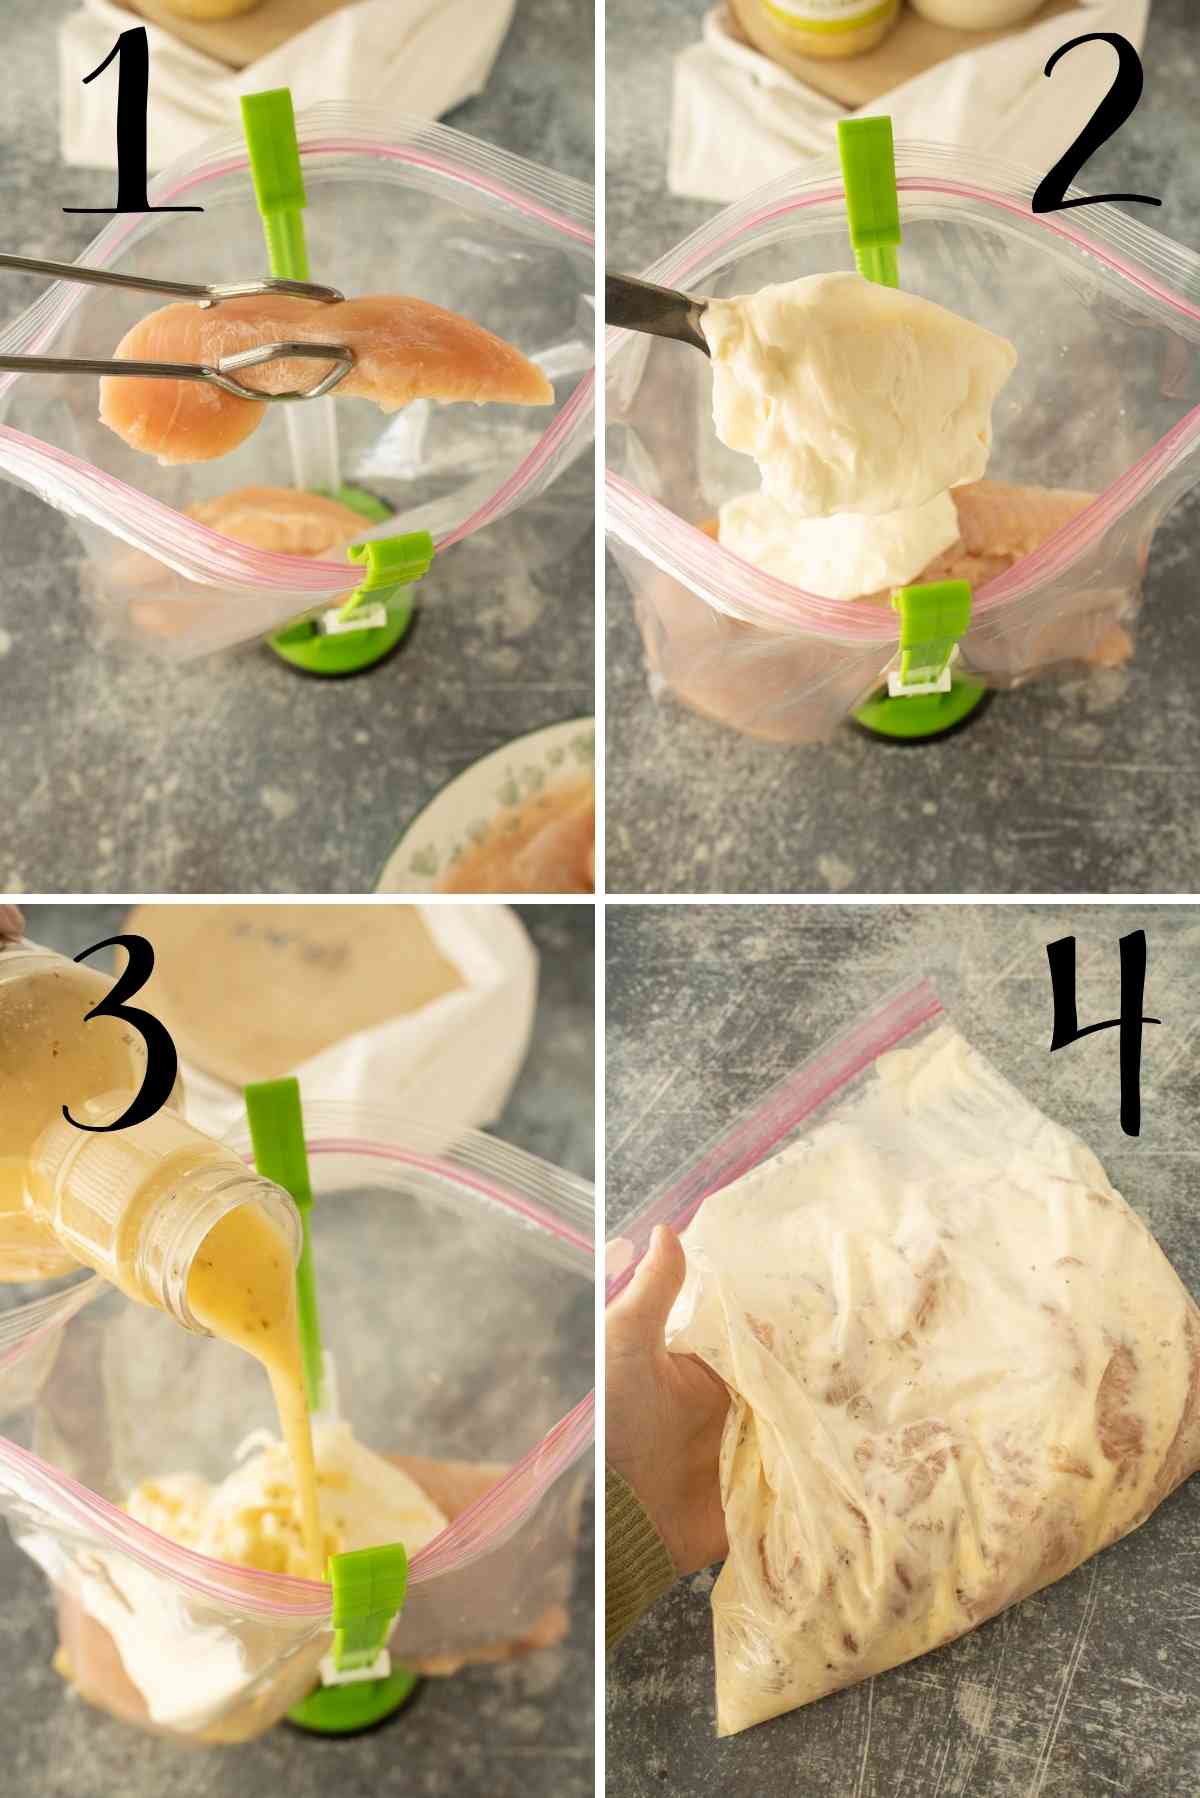 Chicken, mayo and italian dressing put in a ziploc bag and squished around.